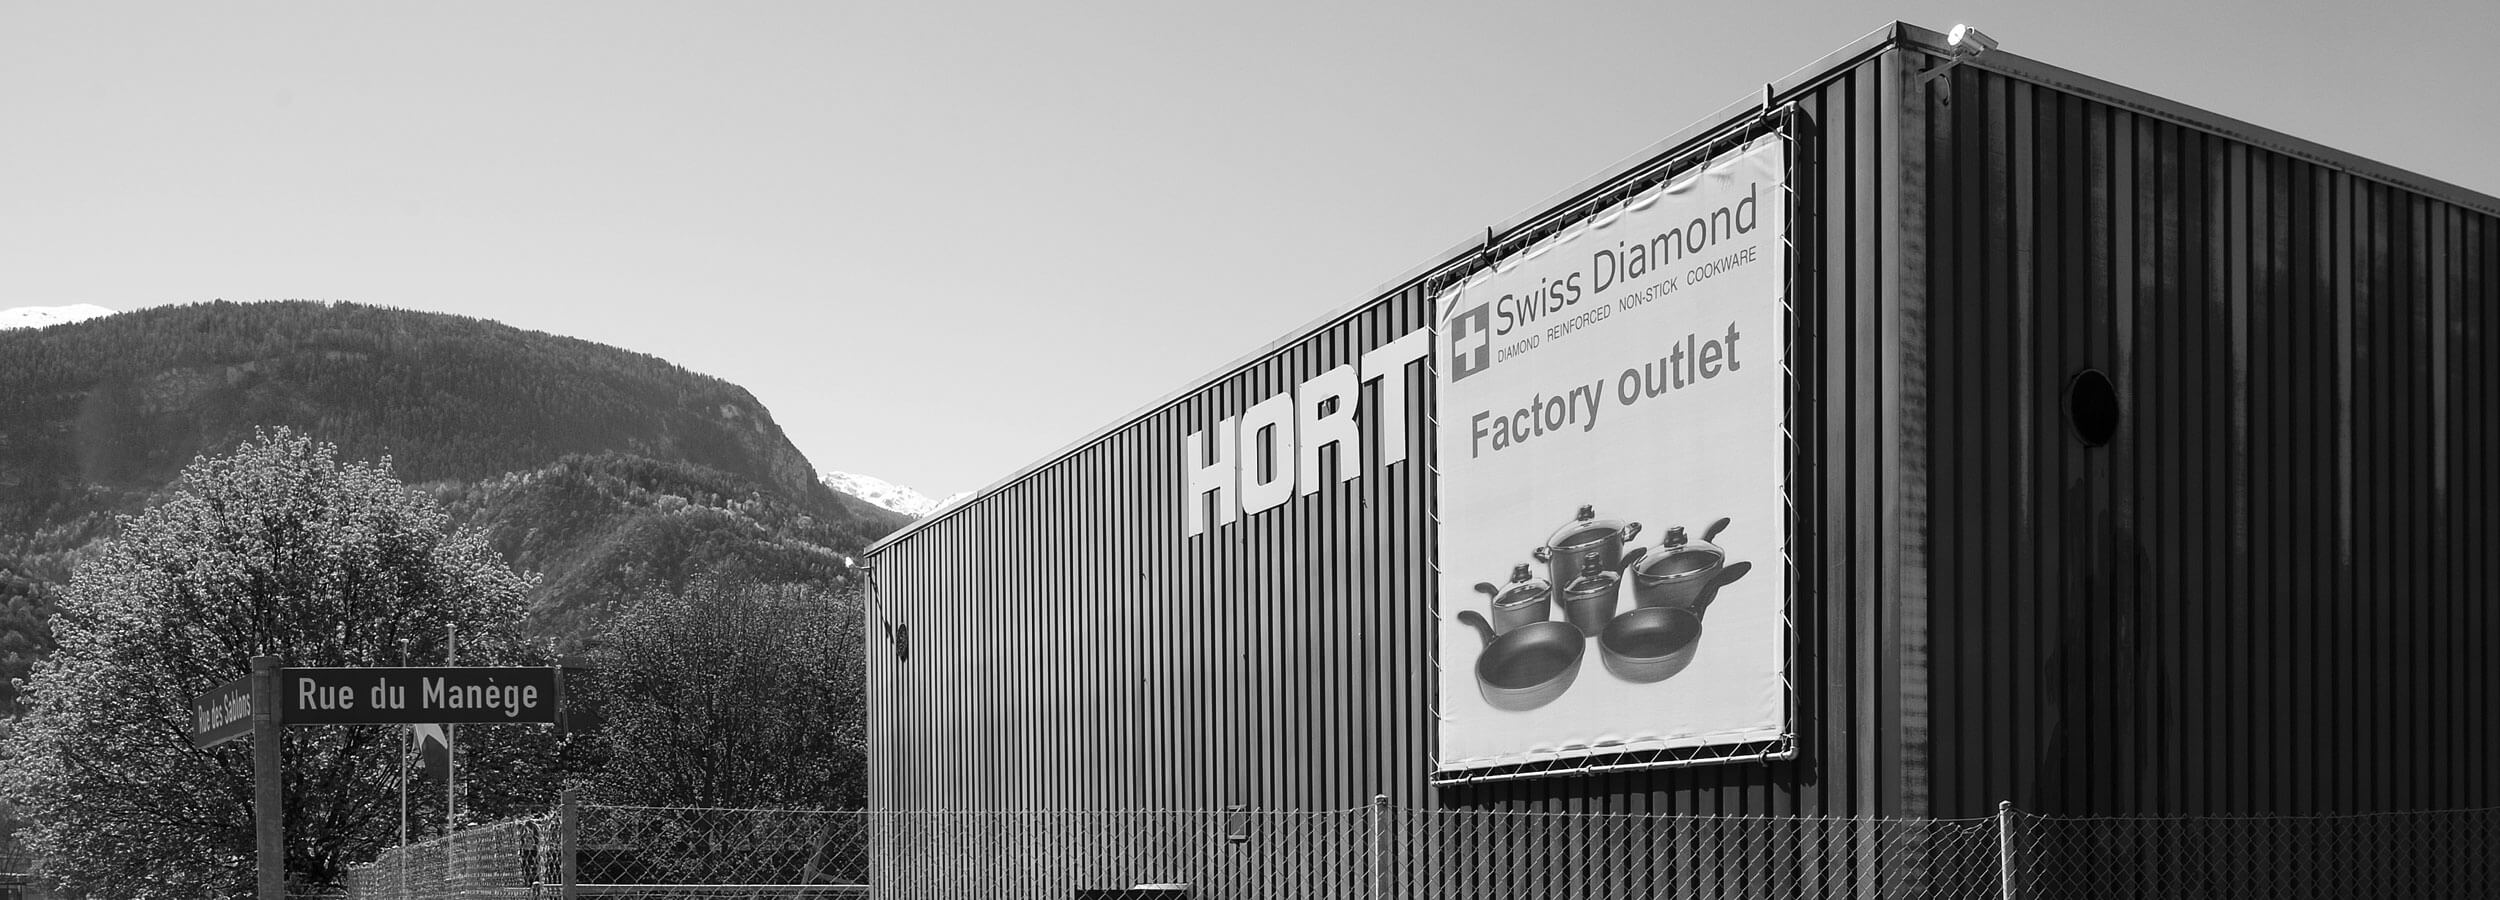 hort factory in Switzerland with a swiss diamond sign